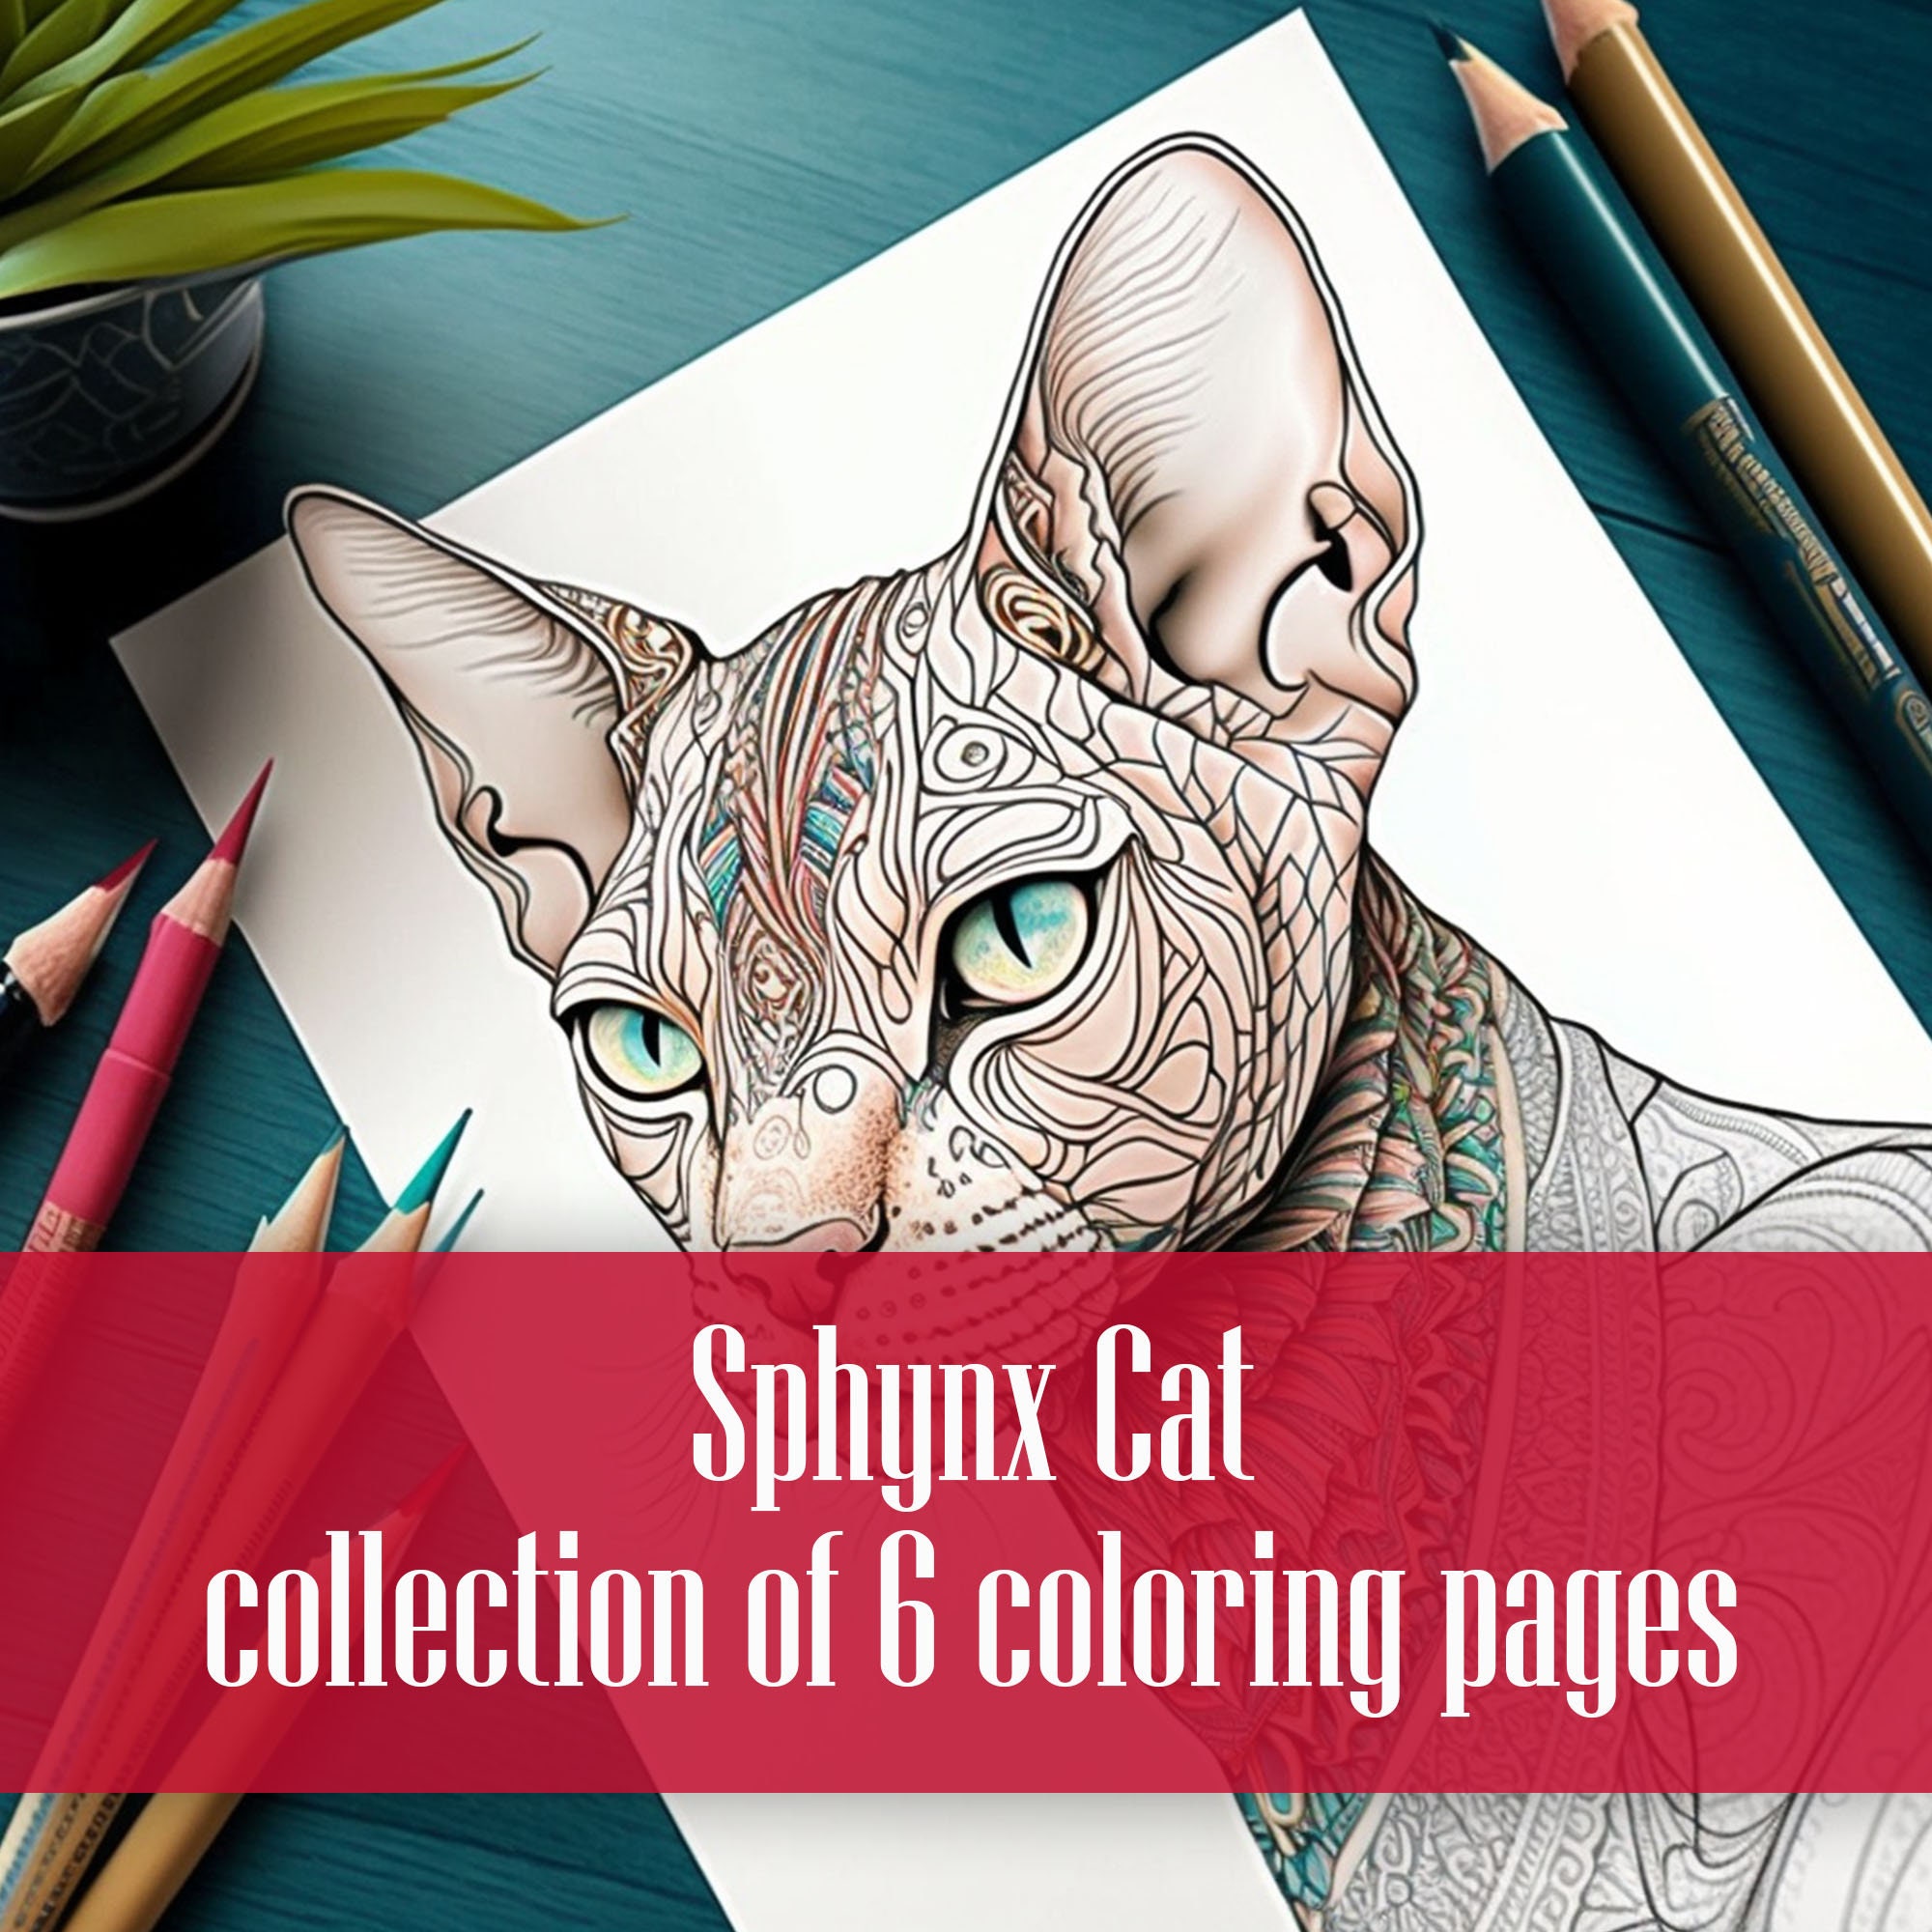 Cute Sphynx Cat Adult Coloring Book Page Mandala Style Stock Vector by  ©Sybirko 625024642